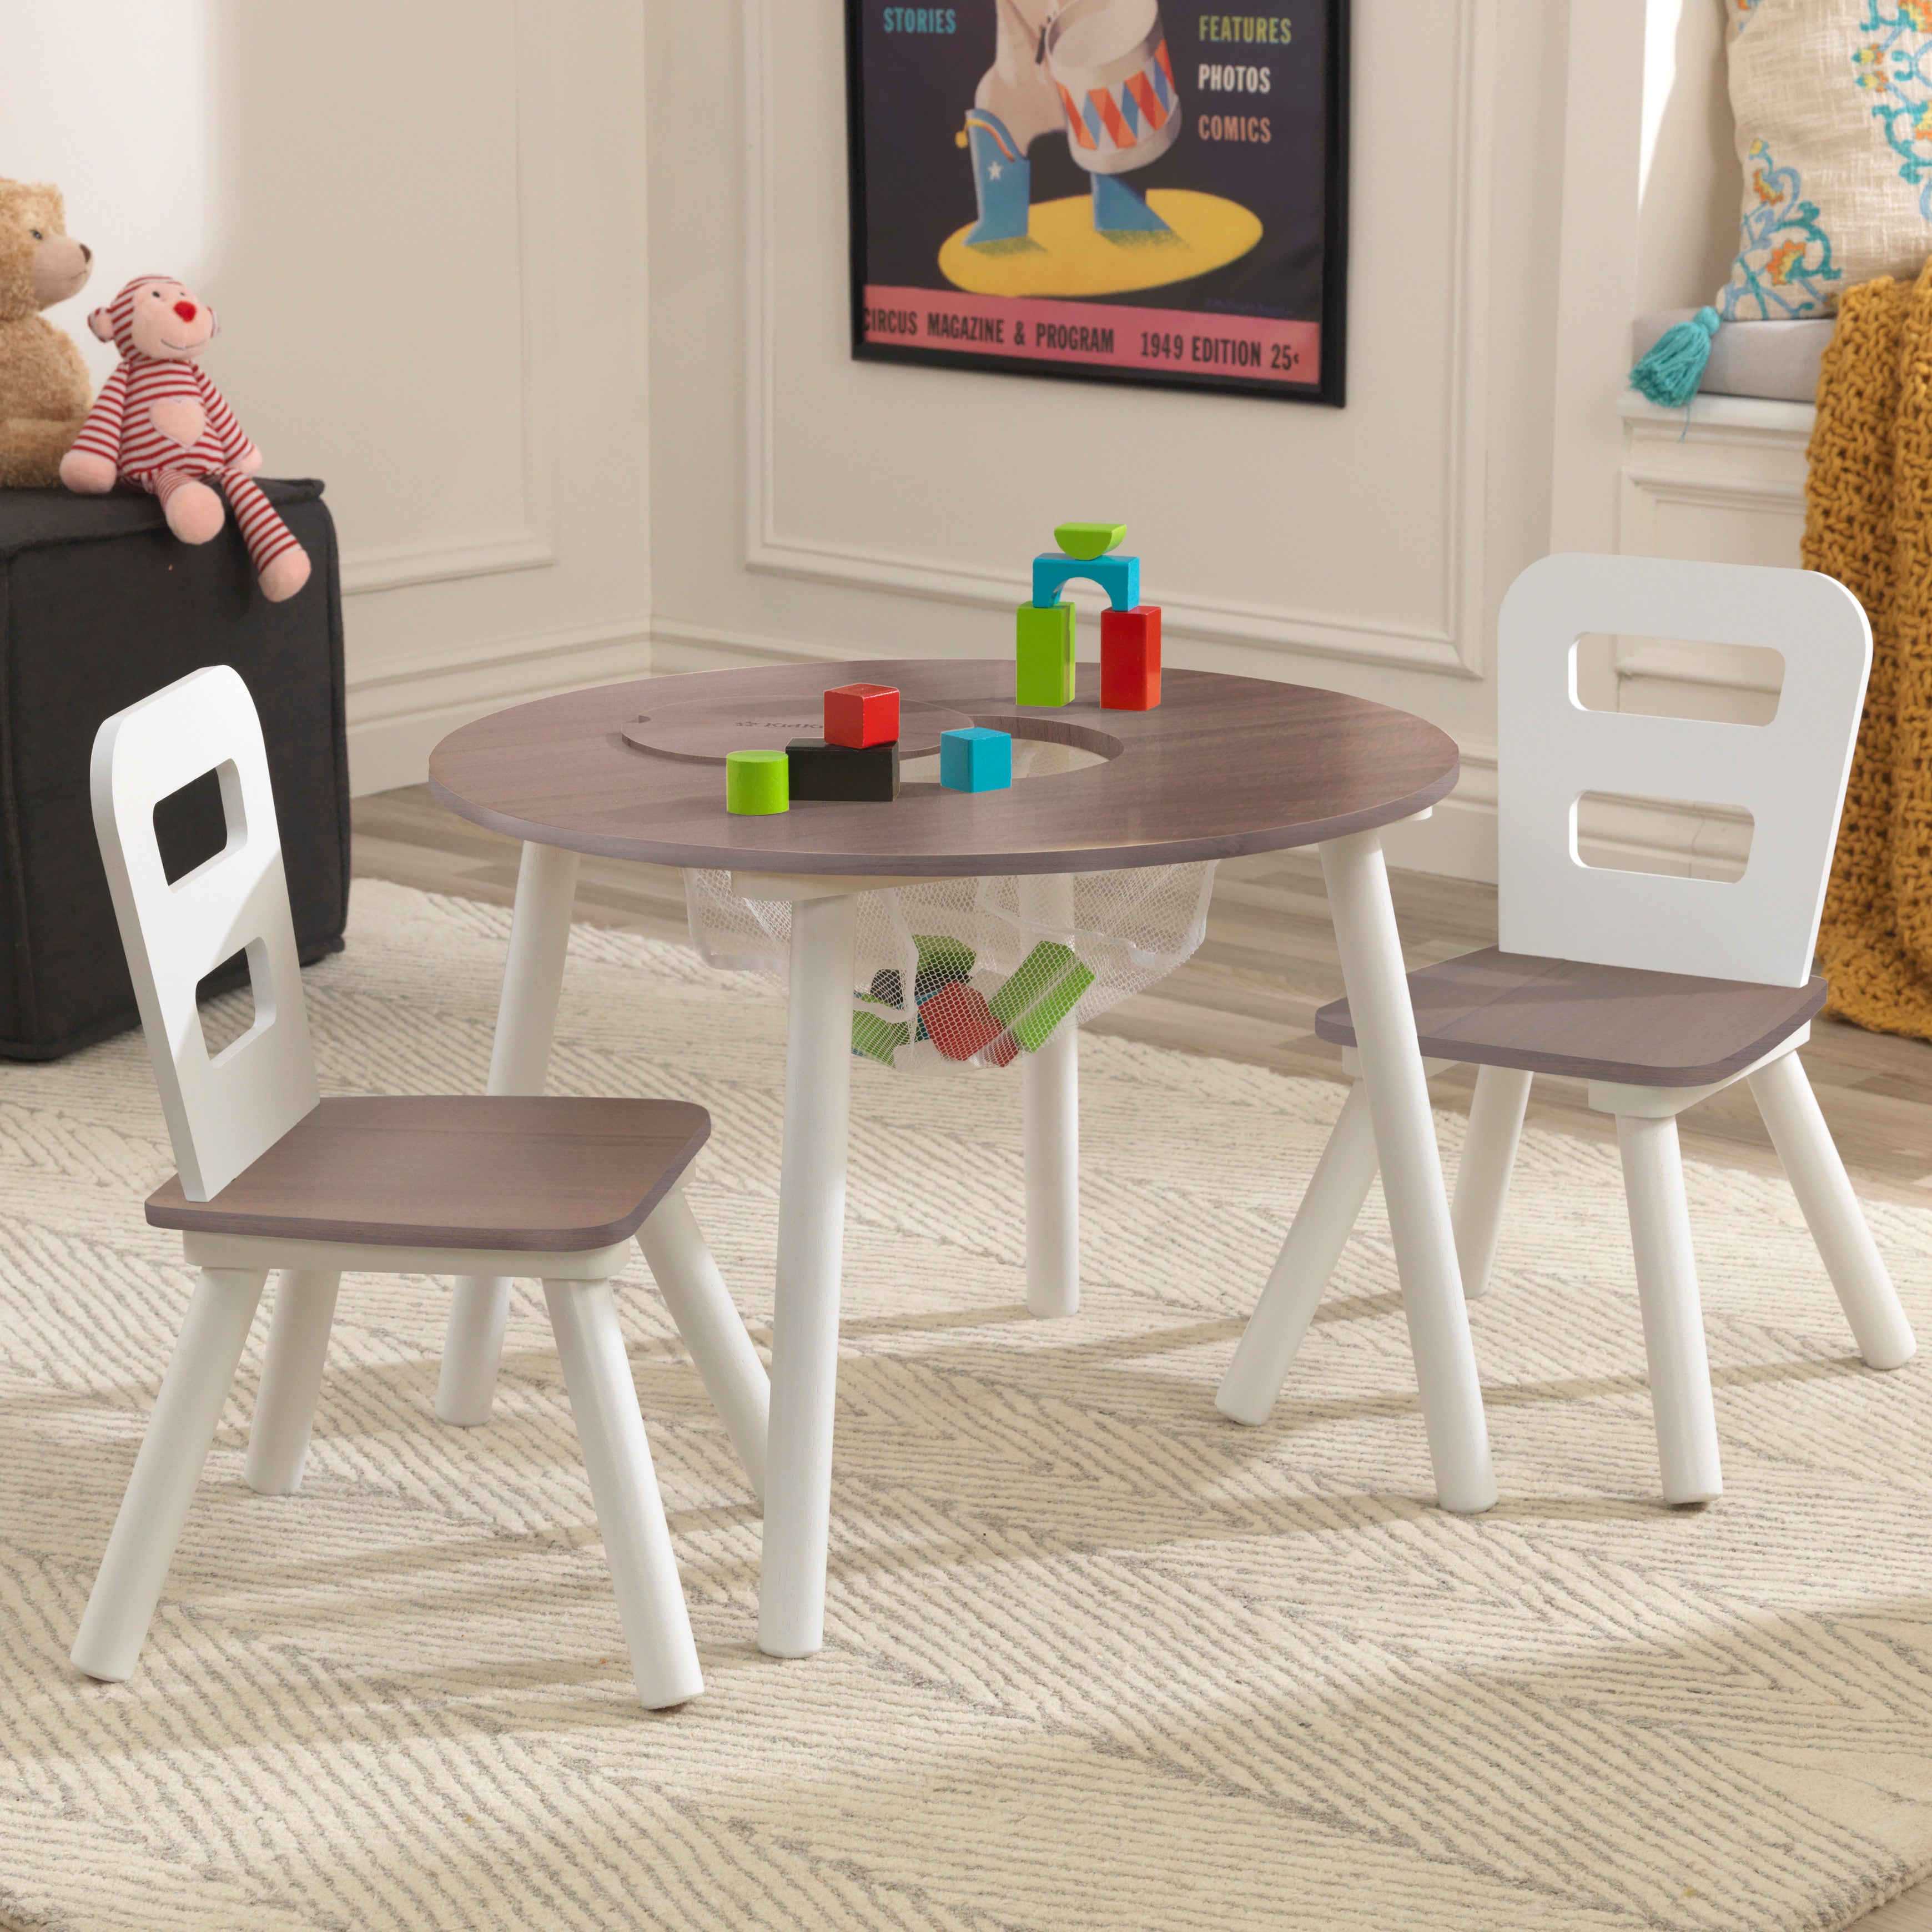 Children Wooden Table and Chairs Nursery Sets Kids Learning Playroom Furniture++ 